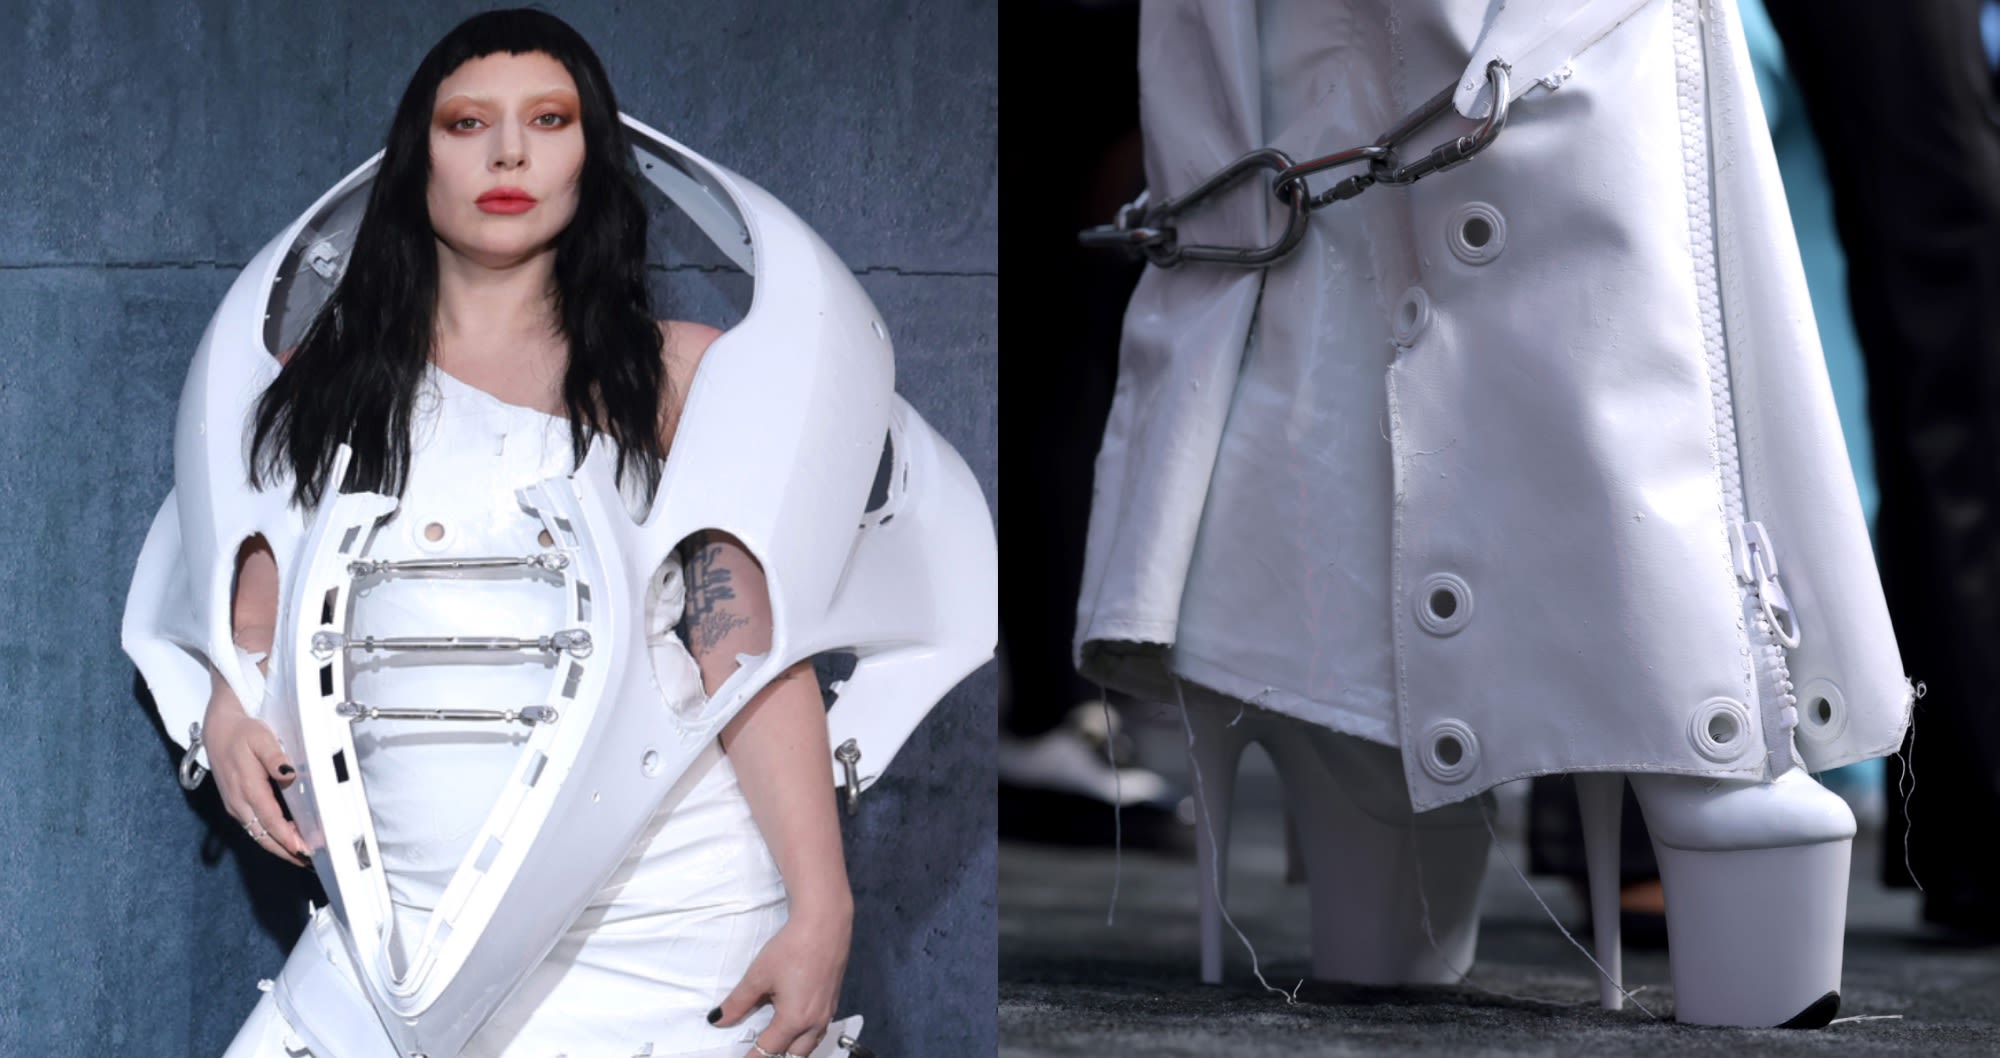 Lady Gaga Turns Heads in Futuristic Outfit and Matching Platform Boots at ‘Gaga Chromatica Ball’ Premiere in Los Angeles